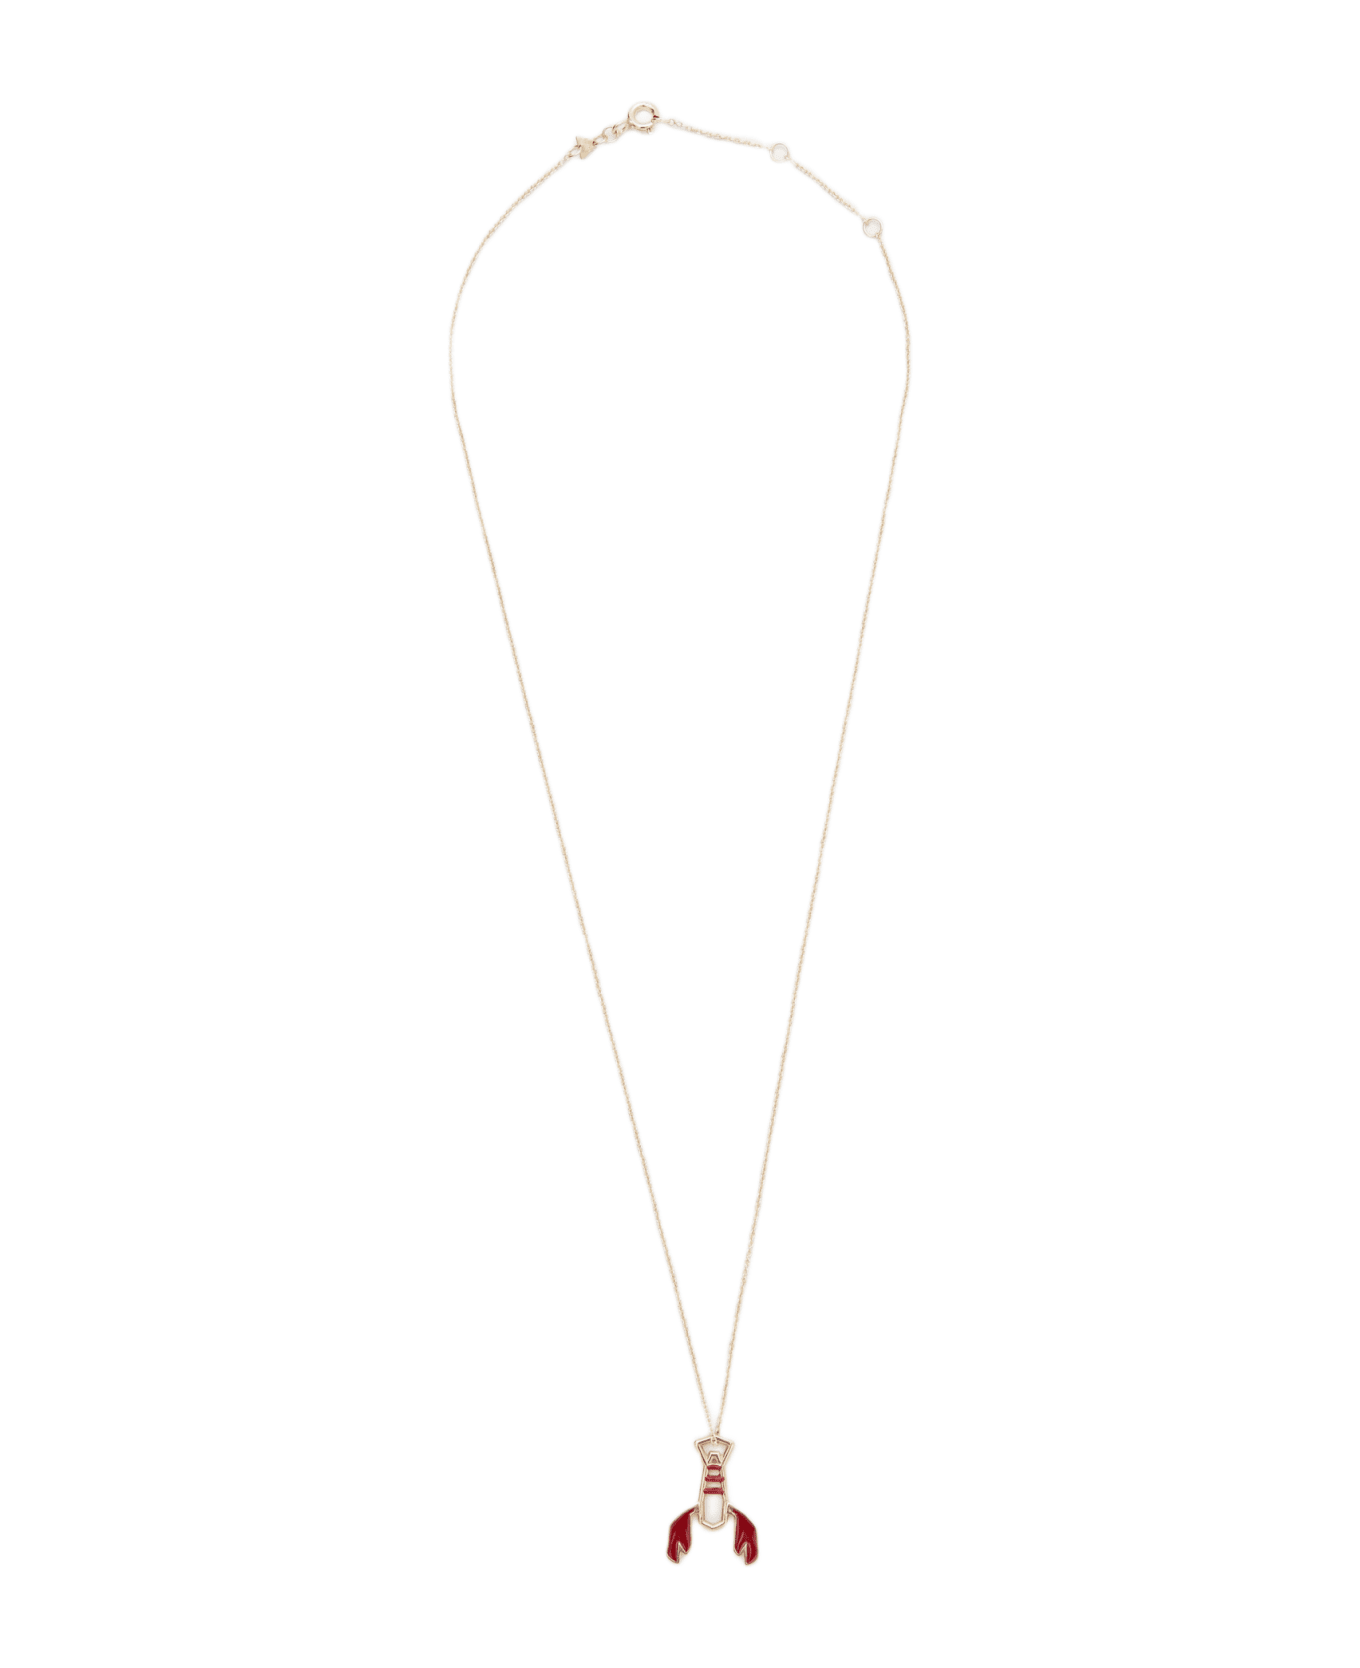 Aliita Lobster Yellow Gold Necklace - Red